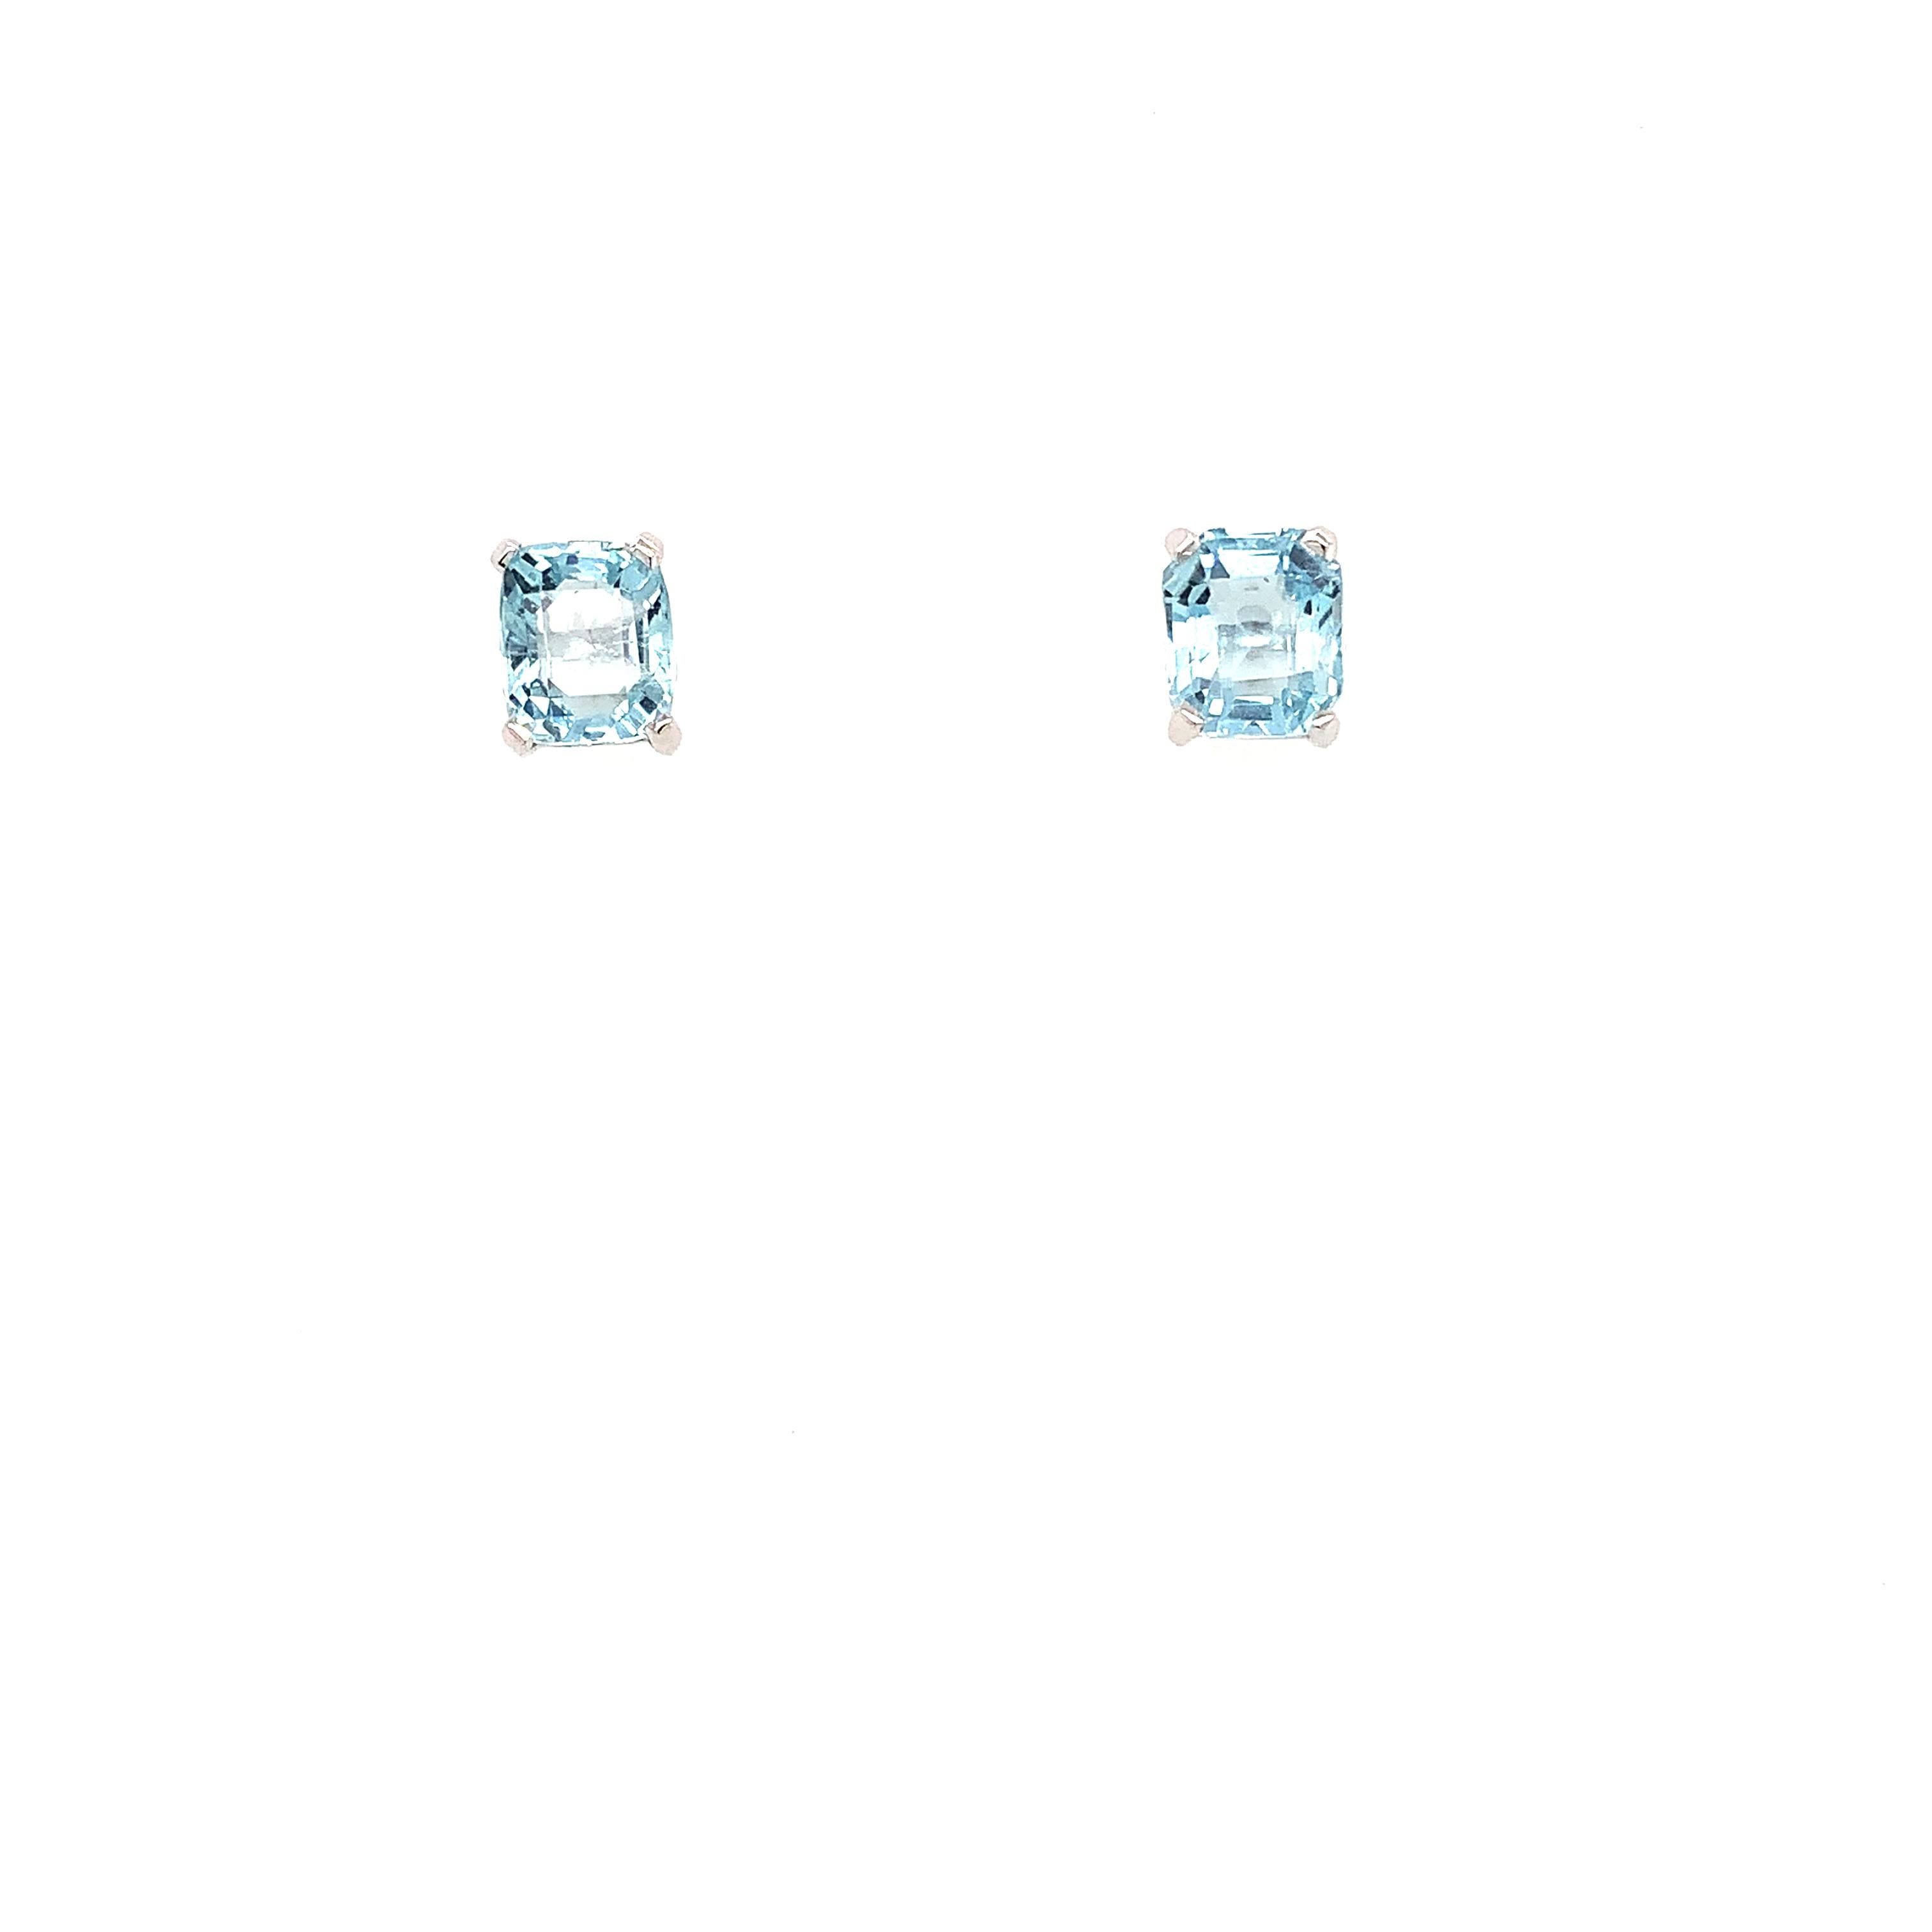 Aquamarine emerald cut solitaire stud earrings 18k white gold
Total weight 2.60ct aquamarine emerald cut light blue colour set in 18k white gold
Hallmark
Four claw setting 
Accompanied with valuation.